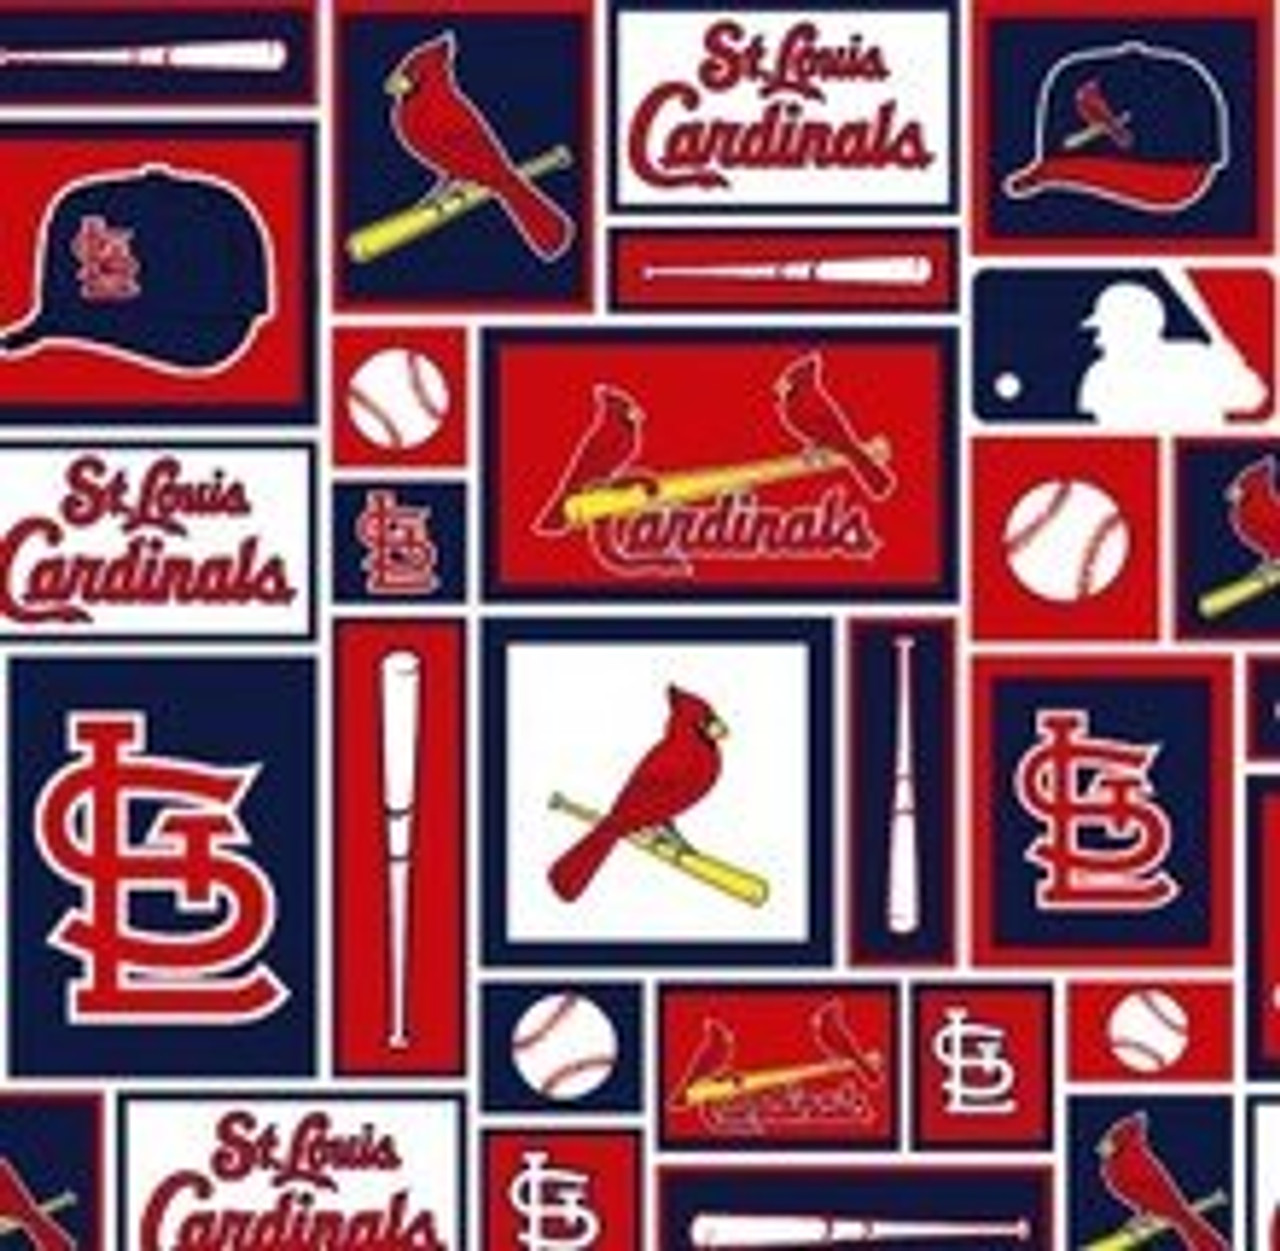 Fabric Traditions MLB Fleece Fabric St. Louis Cardinals by Fabric